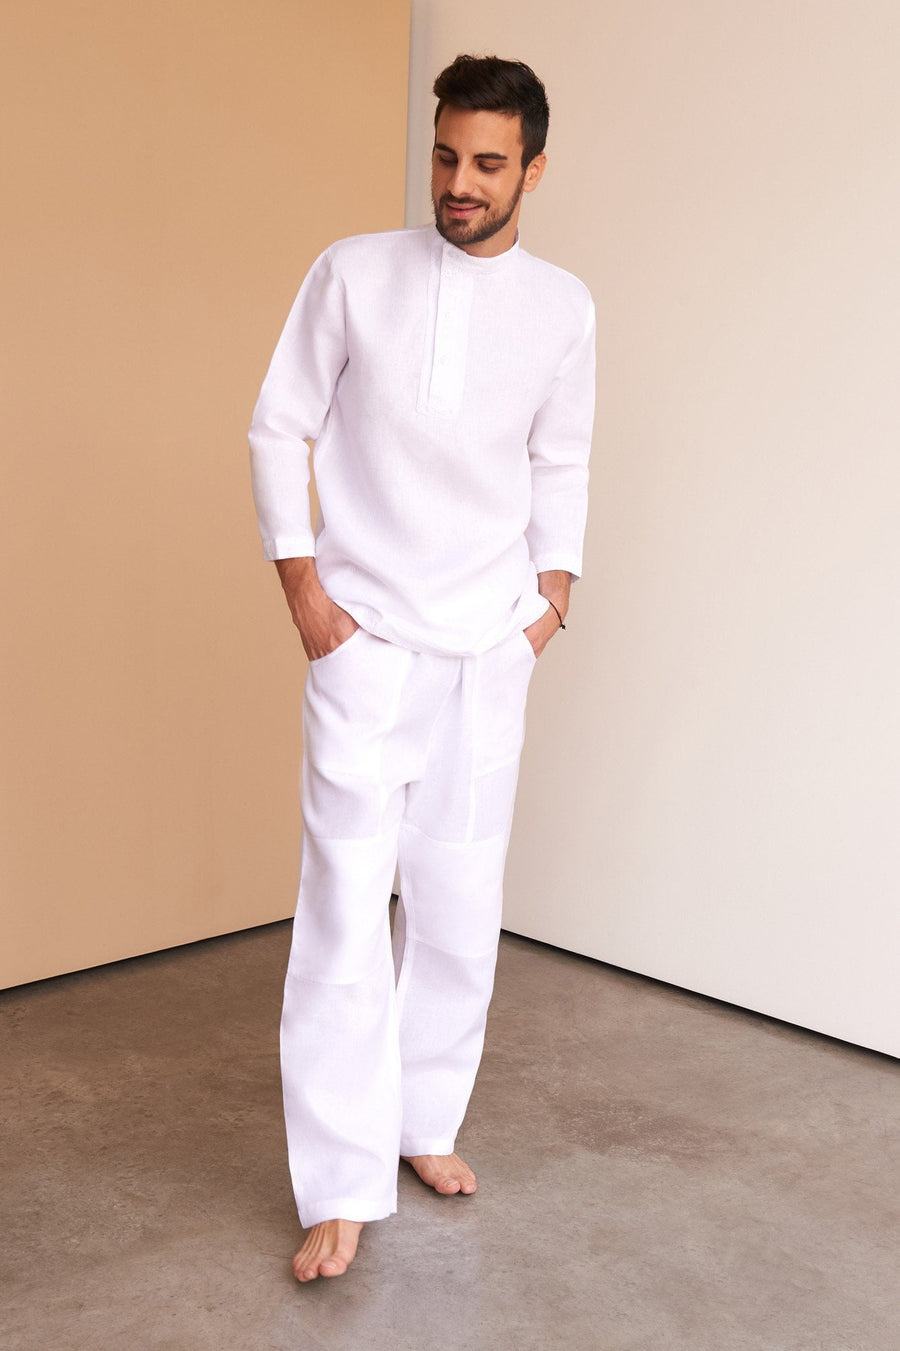 mens white linen casual outfit